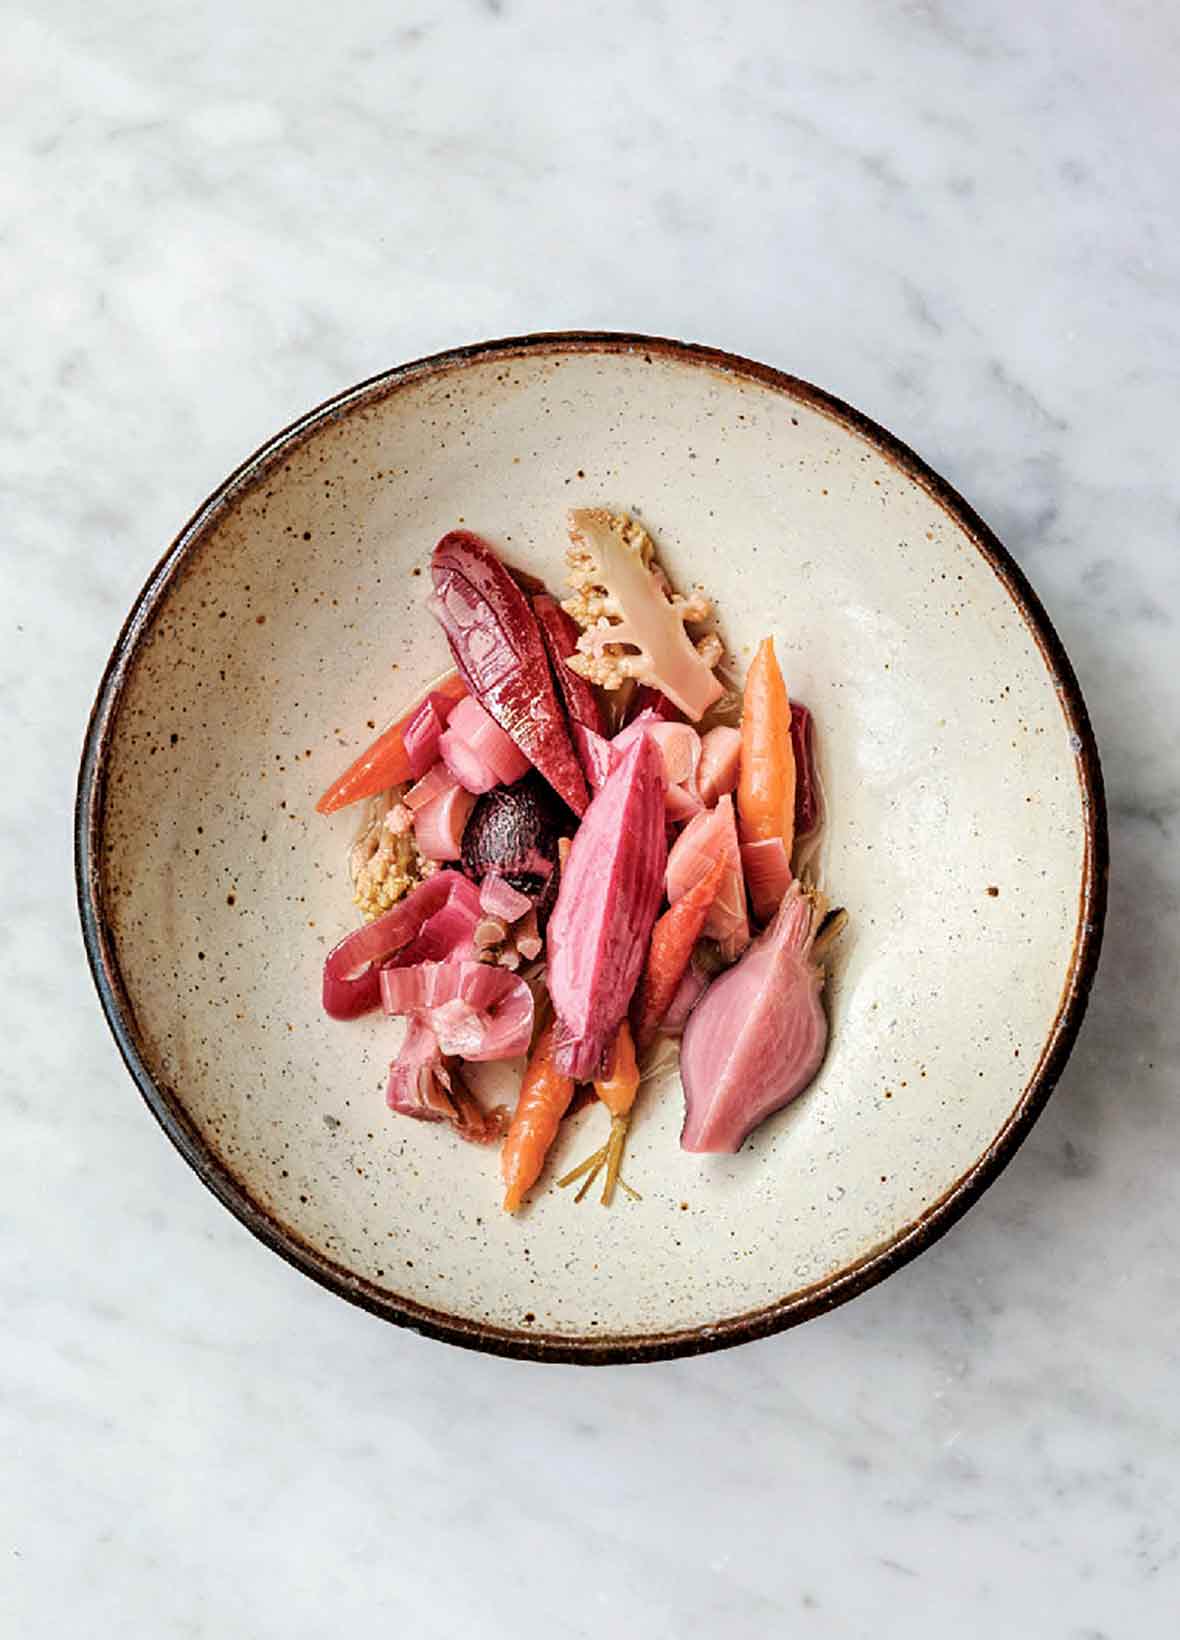 Plate of pickled carrots, beets, radishes, cauliflower, turnips on a marble slab